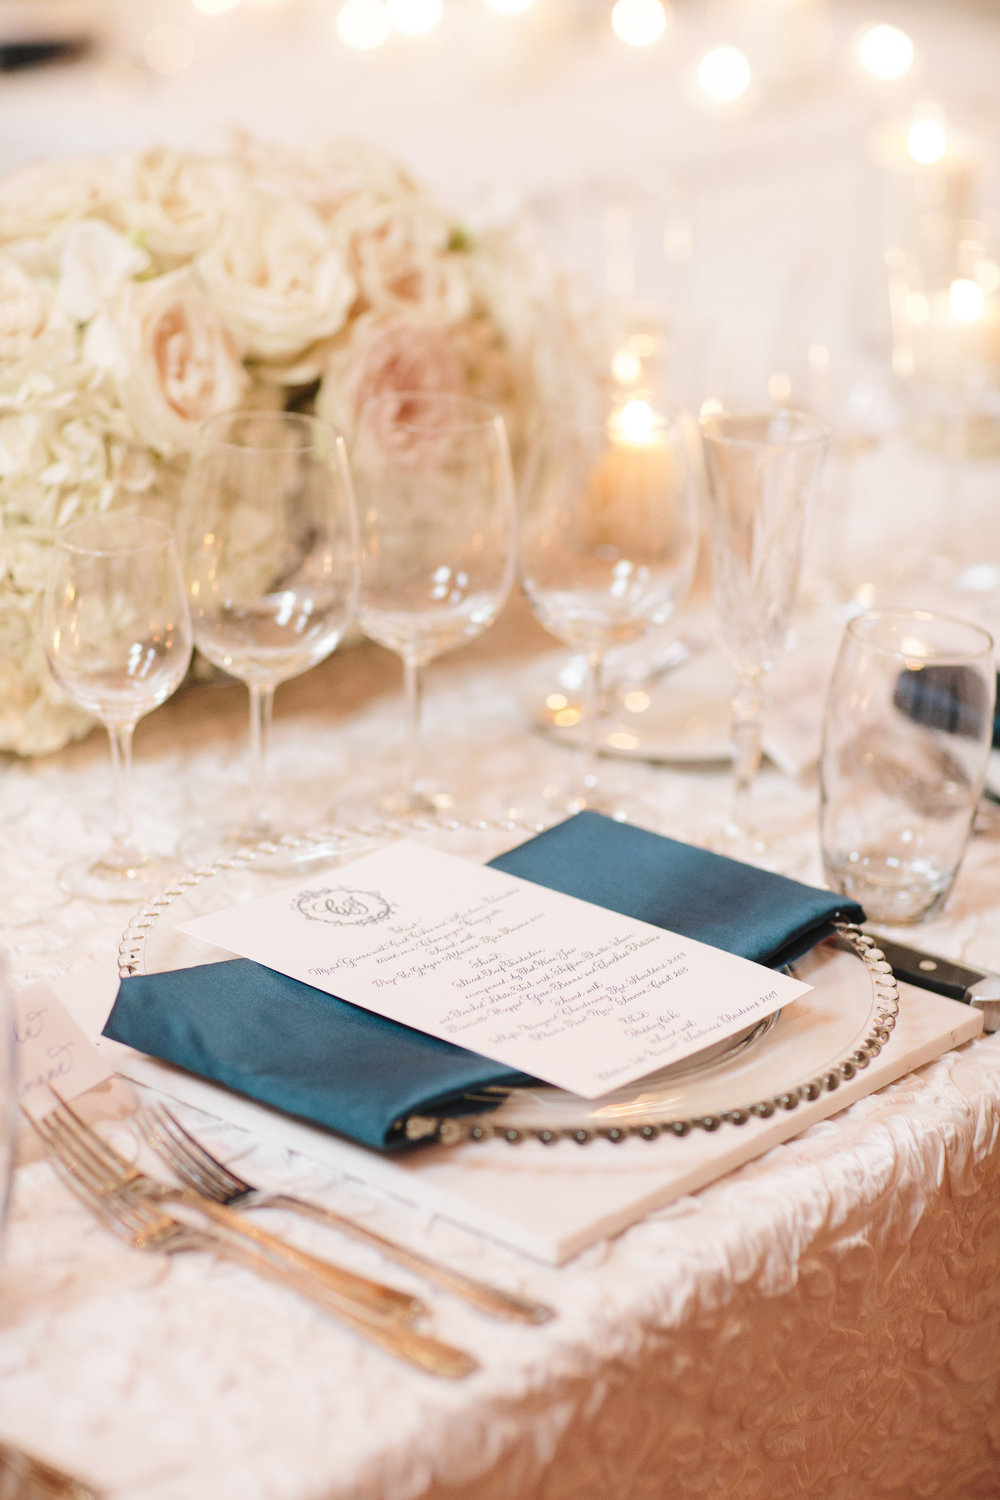 White lace wedding linen with calligraphy menu